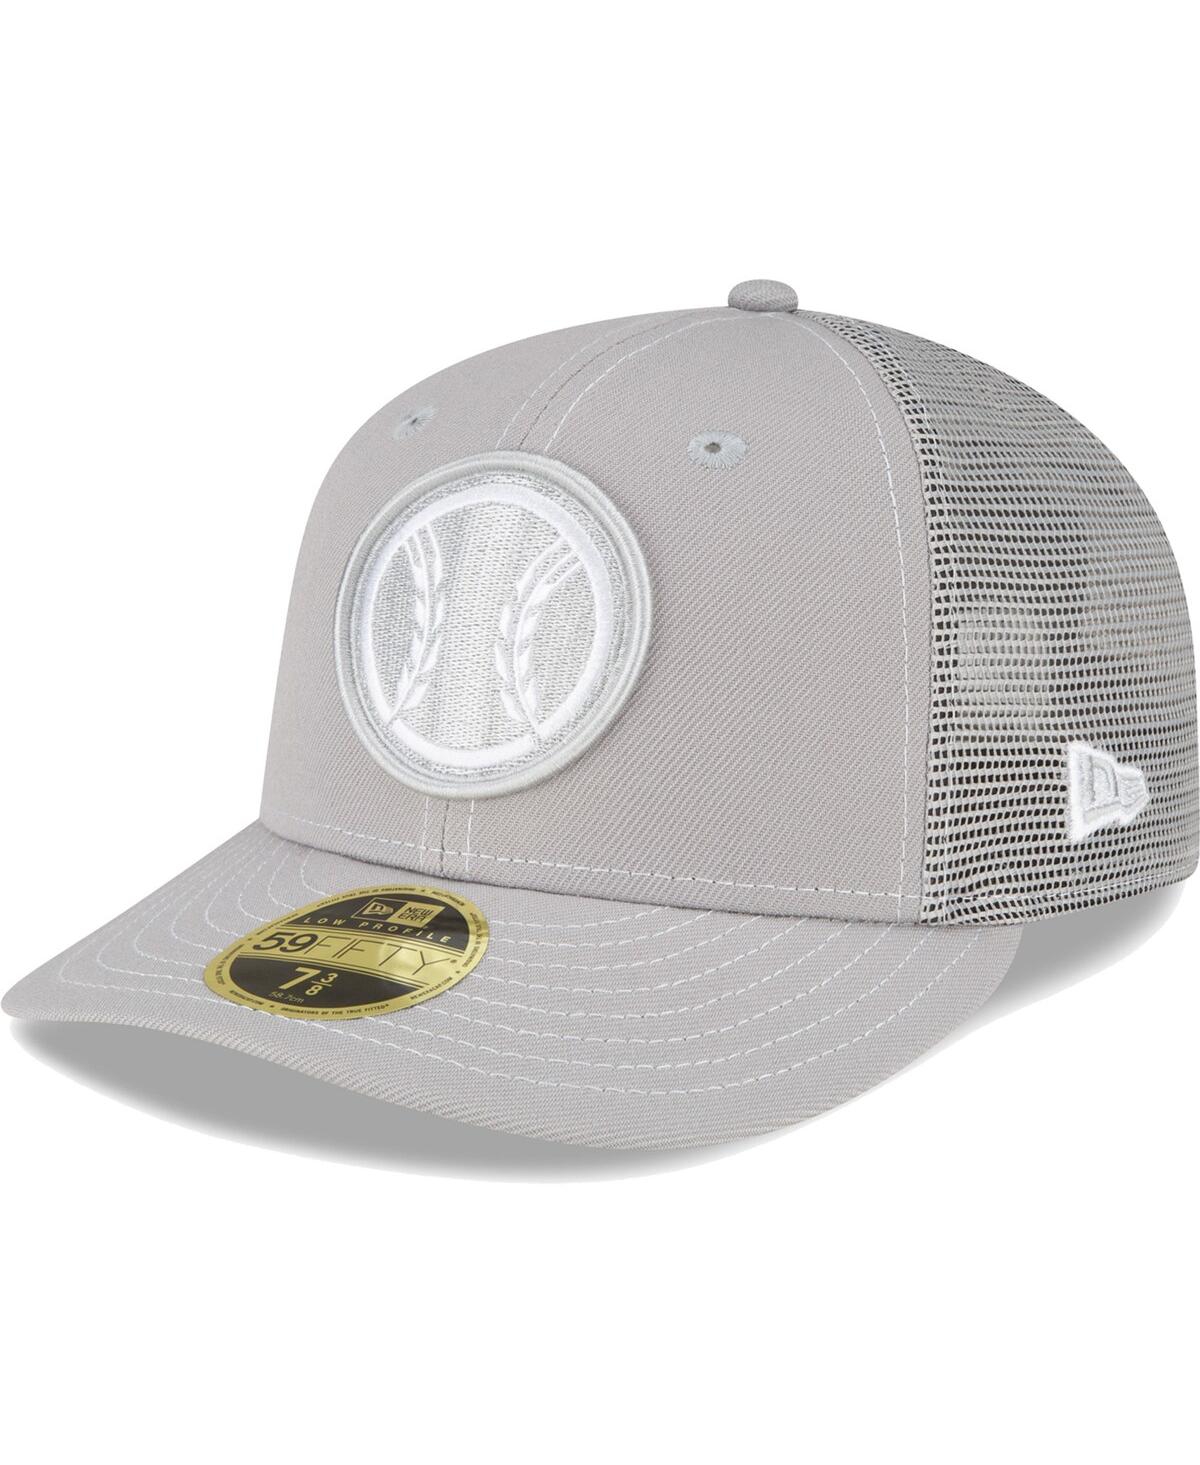 Milwaukee Brewers New Era City Connect 9FIFTY Adjustable Snapback Cap